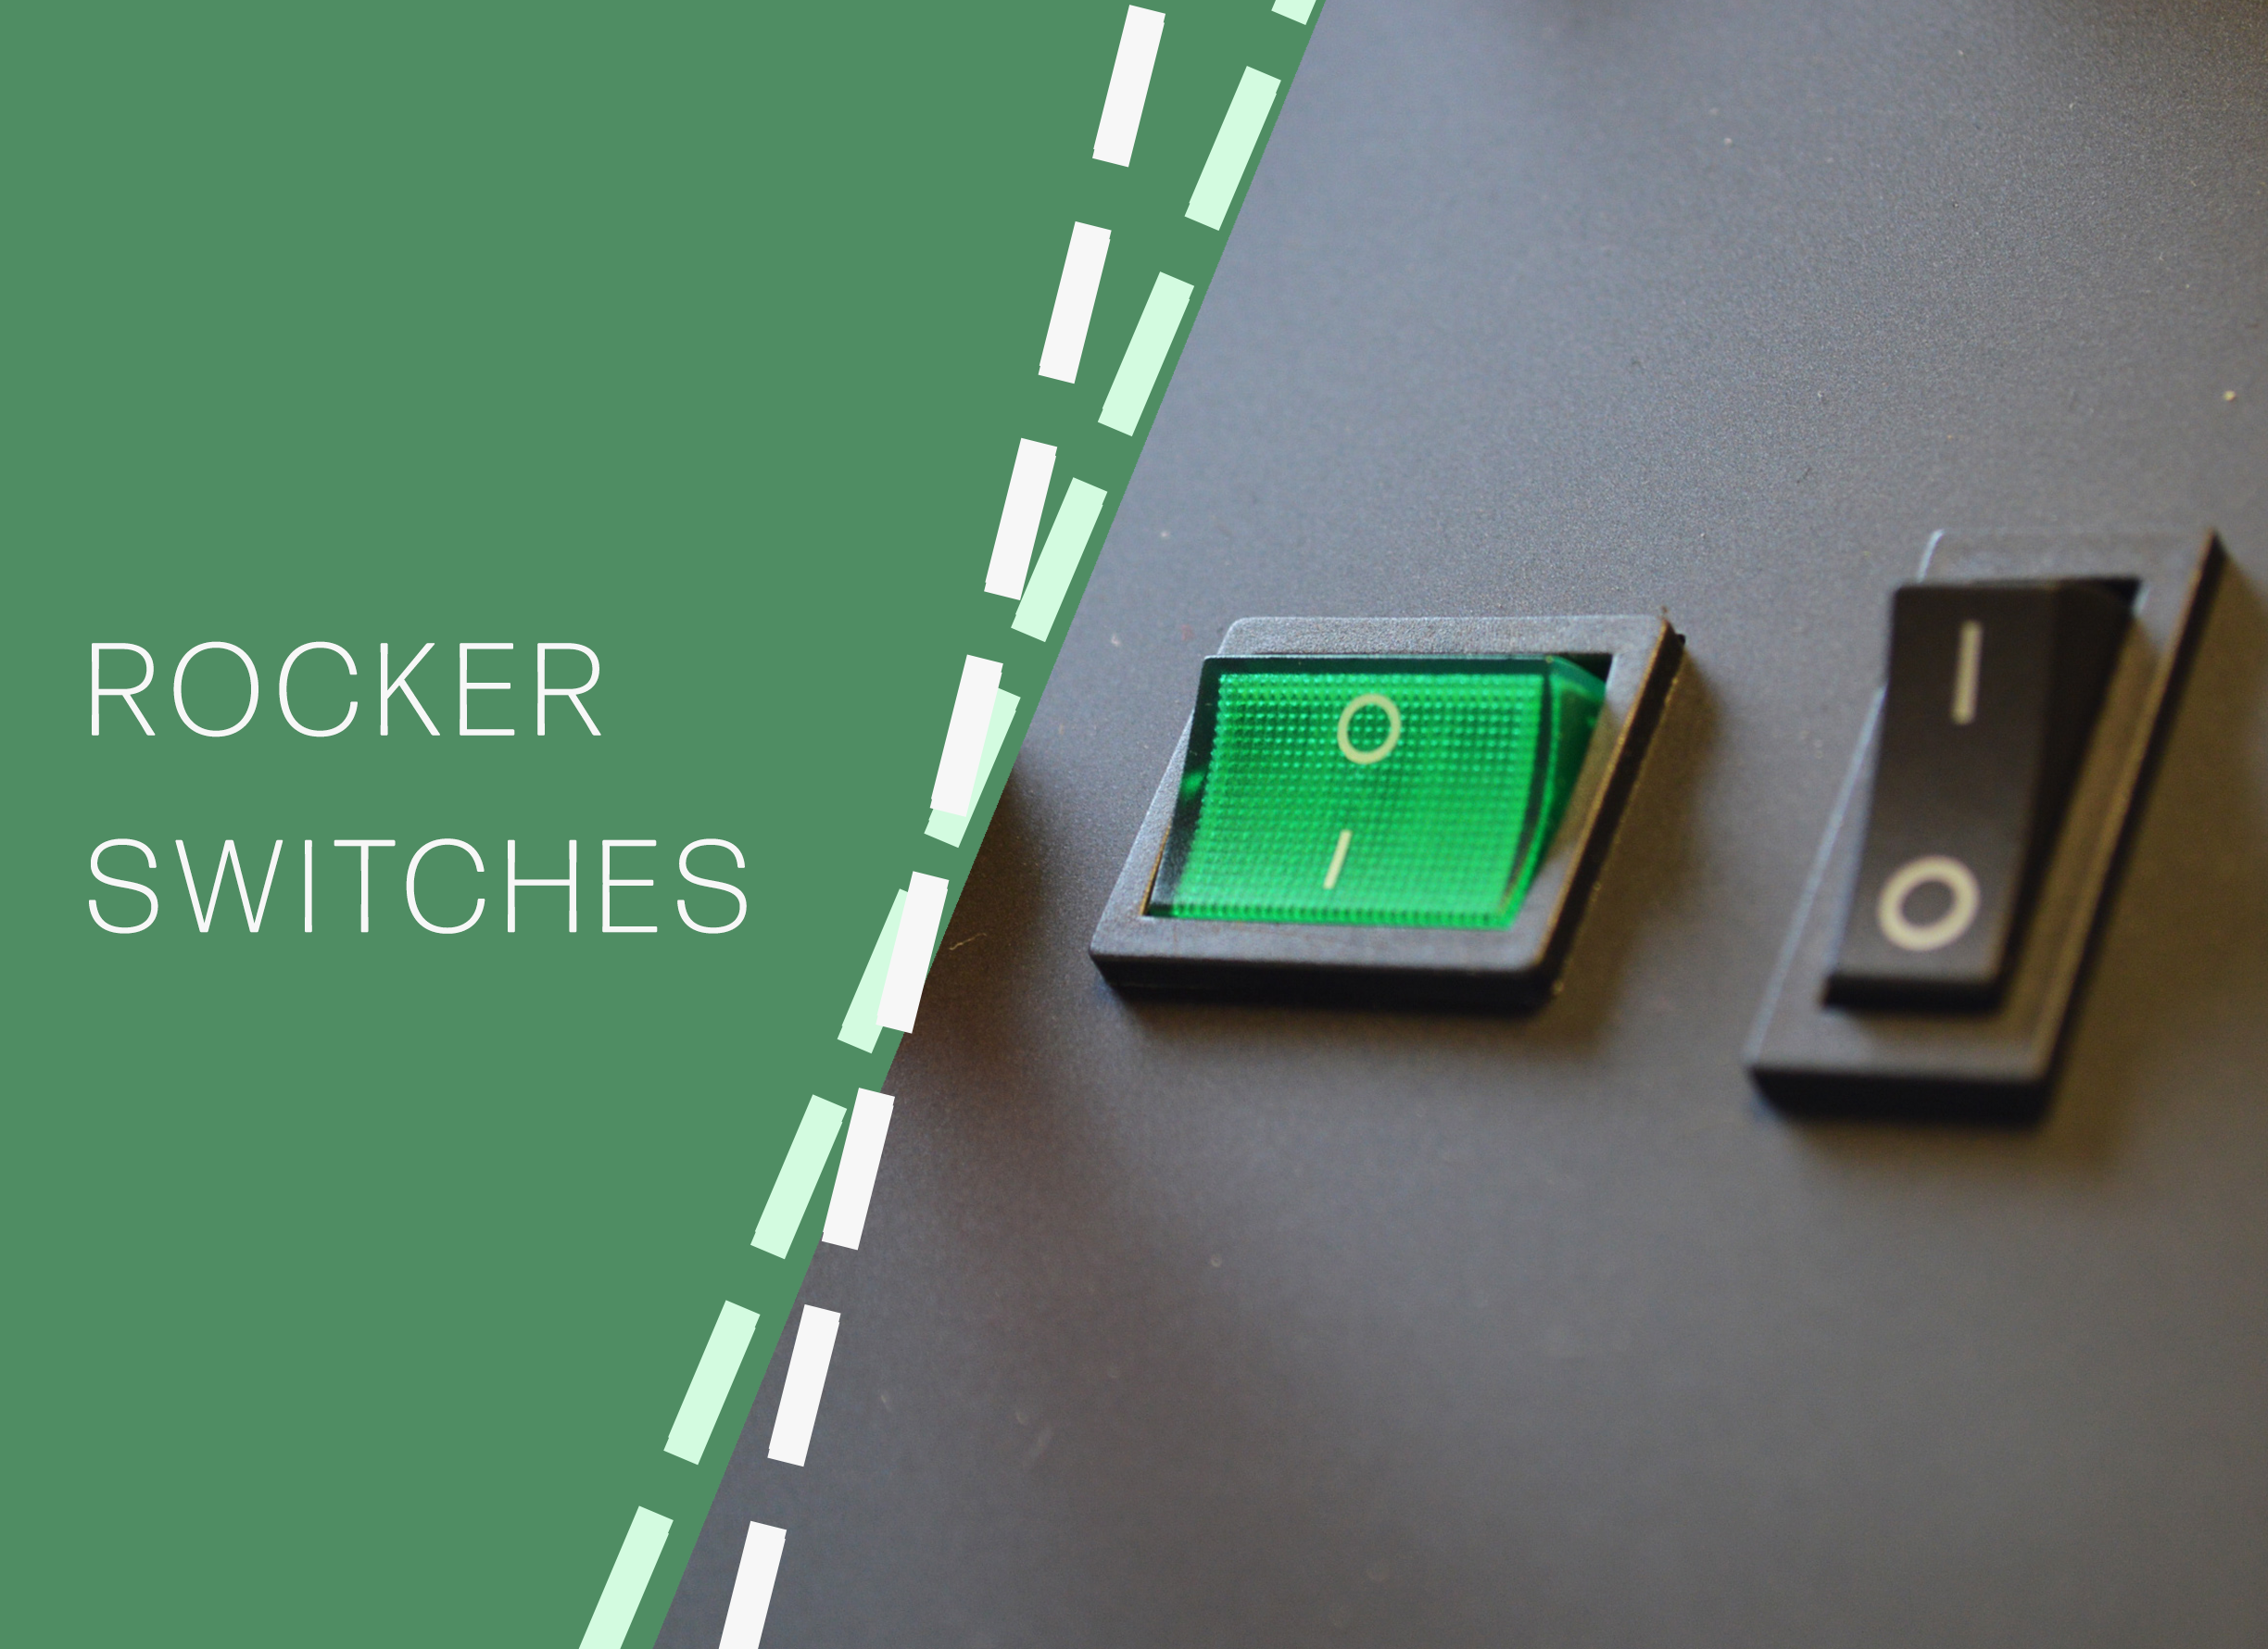 PCB and Panel Mount, Rocker and Toggle Switches, LED Illuminated, Rocker Switch, non-illuminated etched and stamped rocker switch. RJS Electronics Ltd